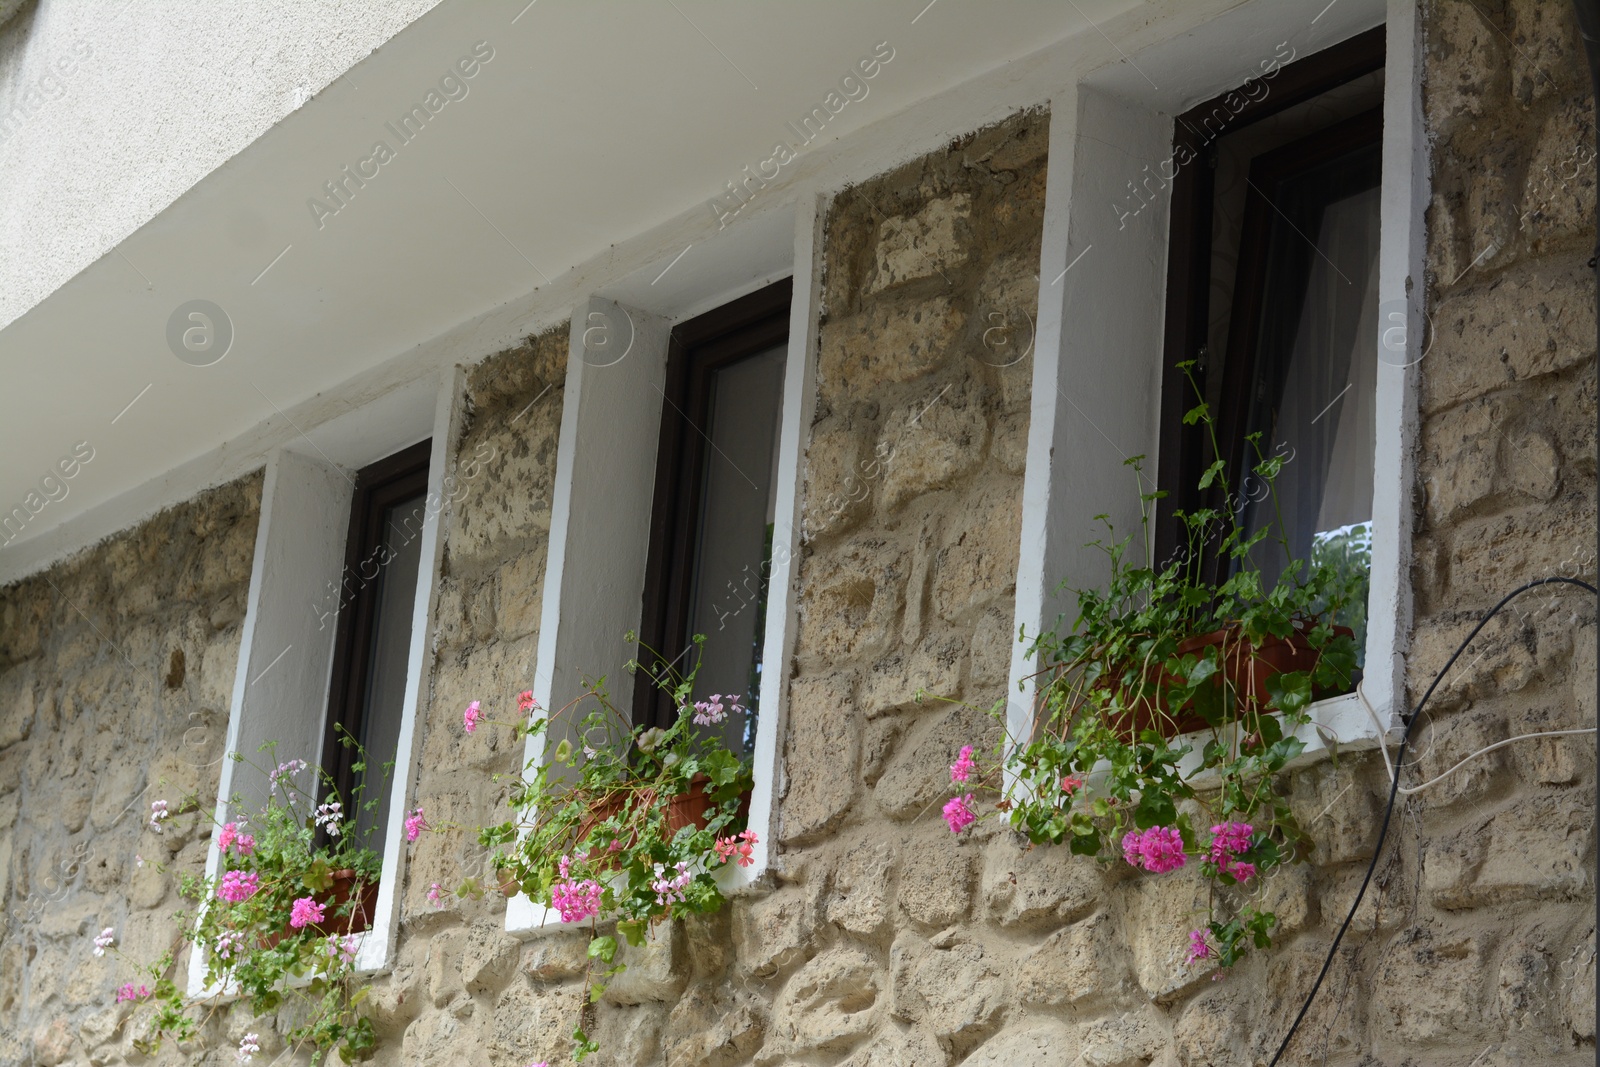 Photo of Exterior of beautiful residential building with small windows and flowers in pots